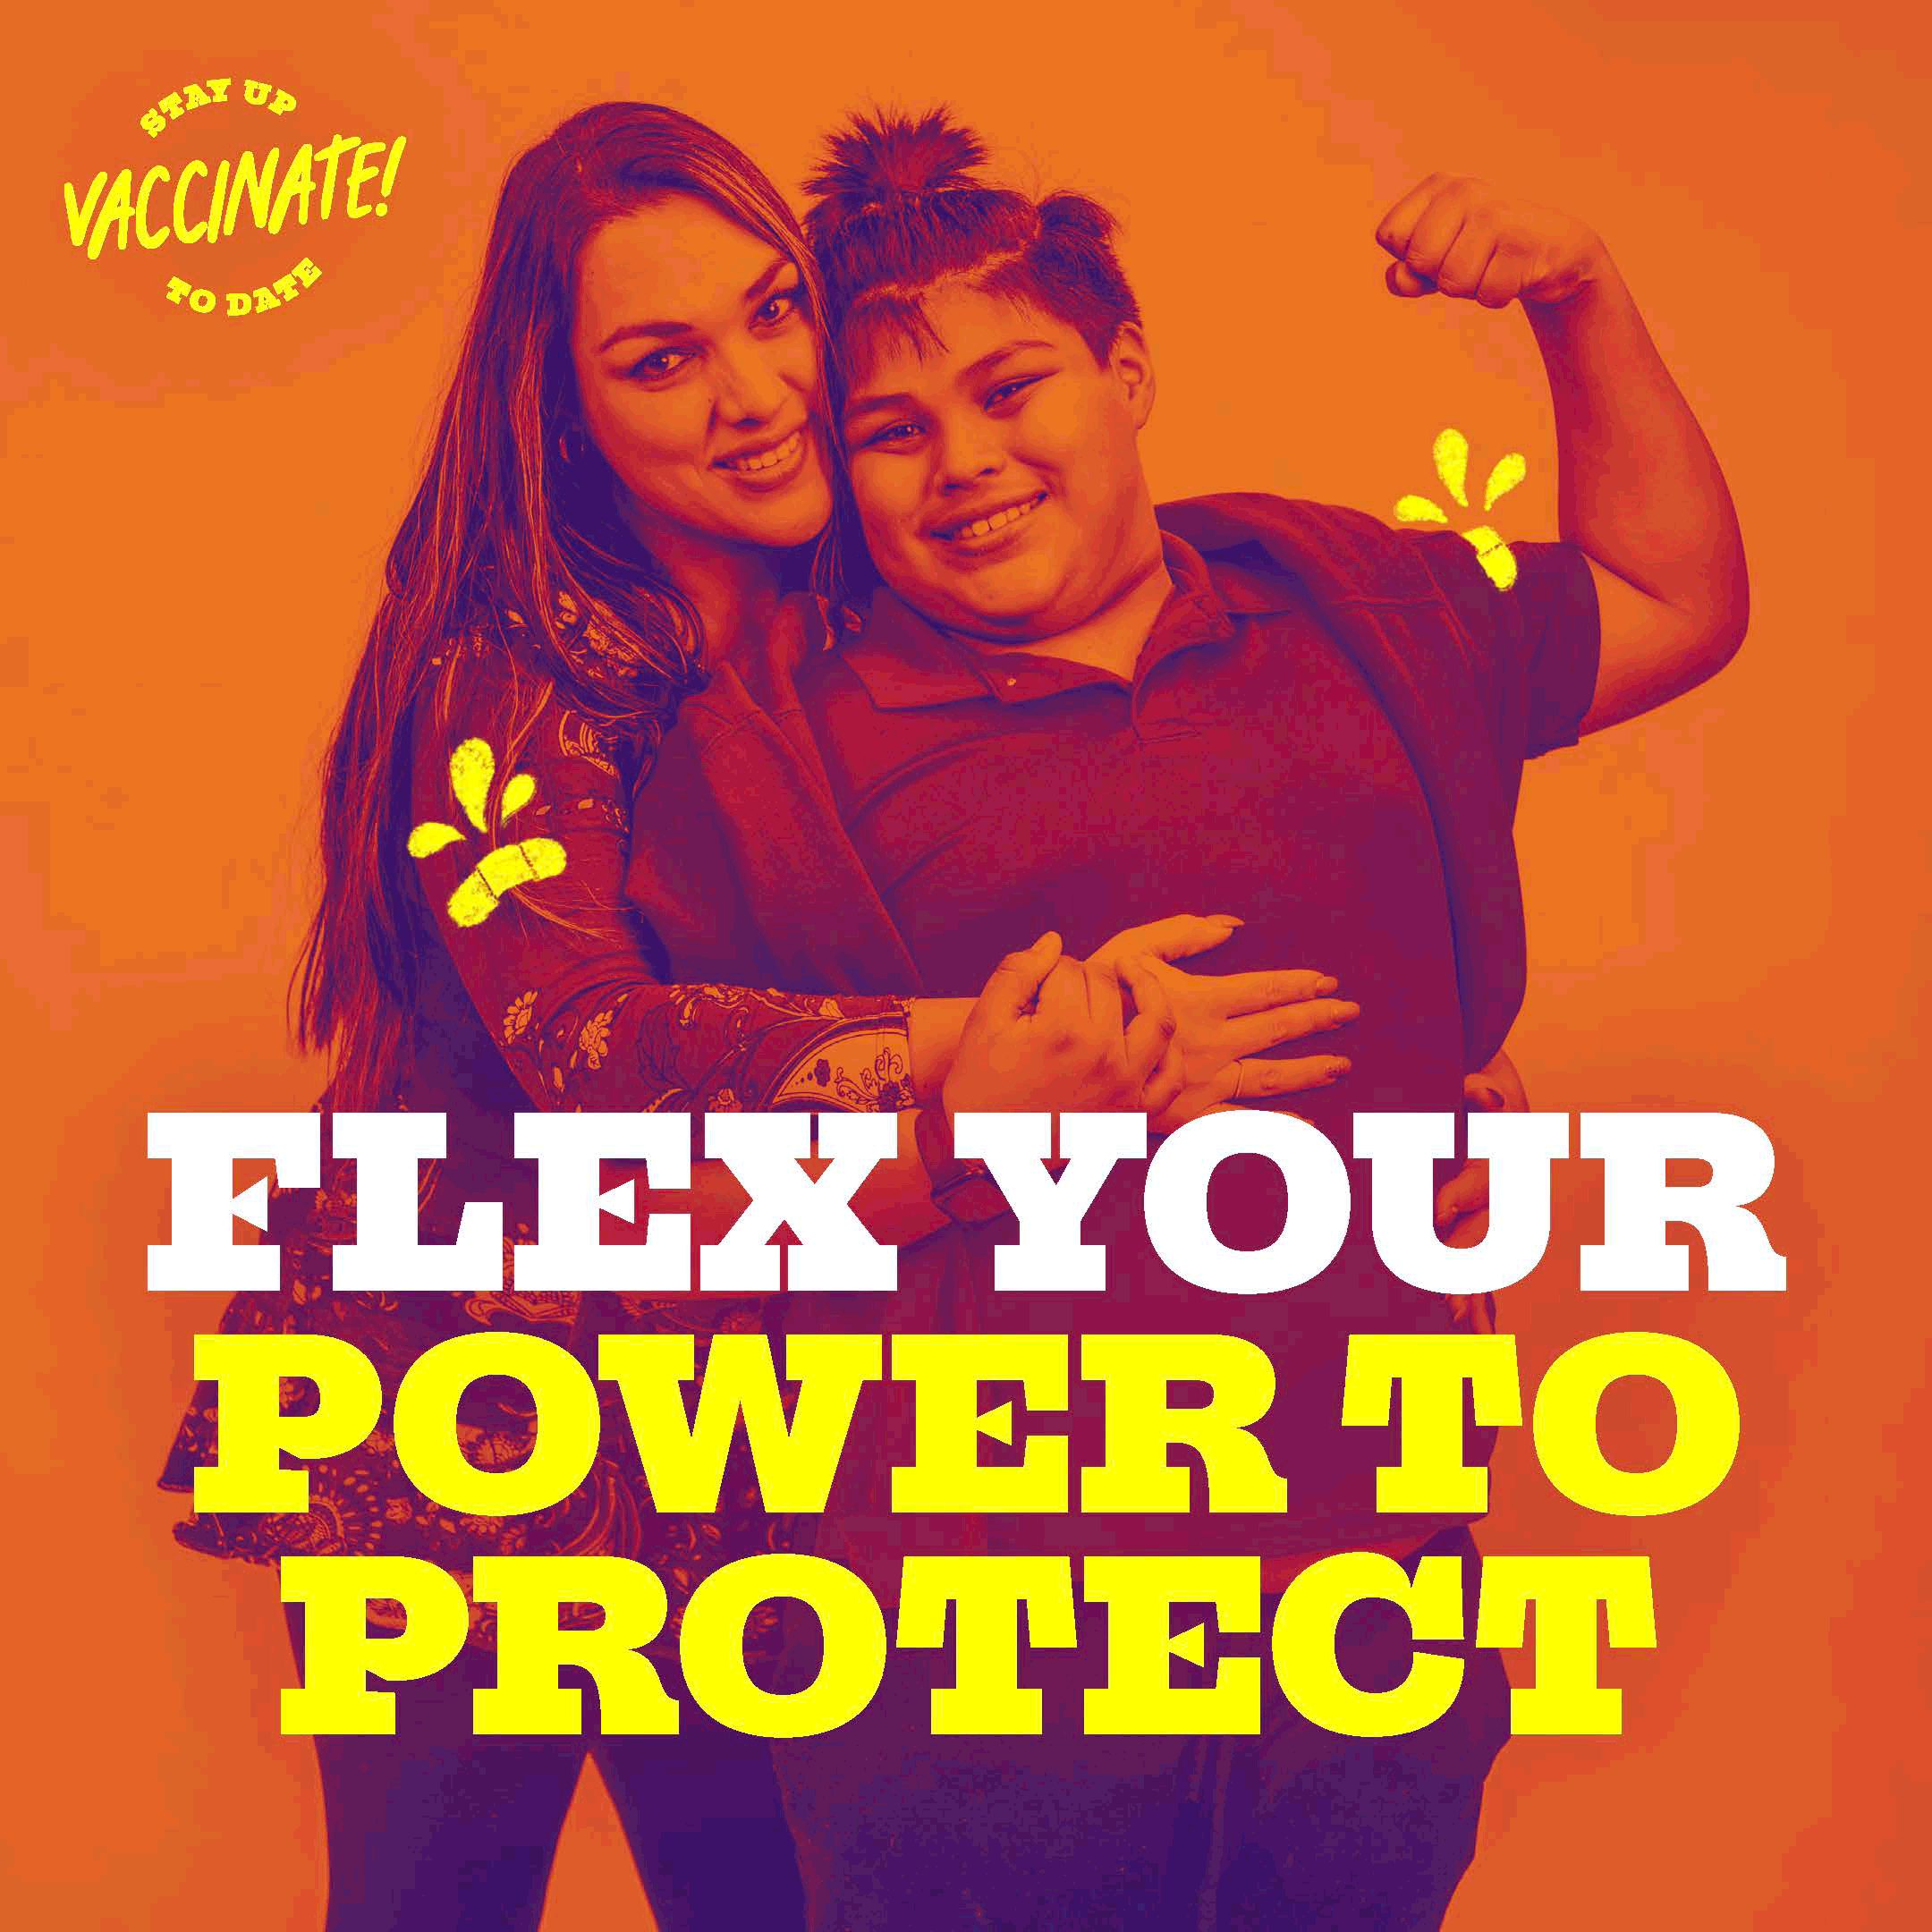 Flex your power to protect. Stay up to date, vaccinate!